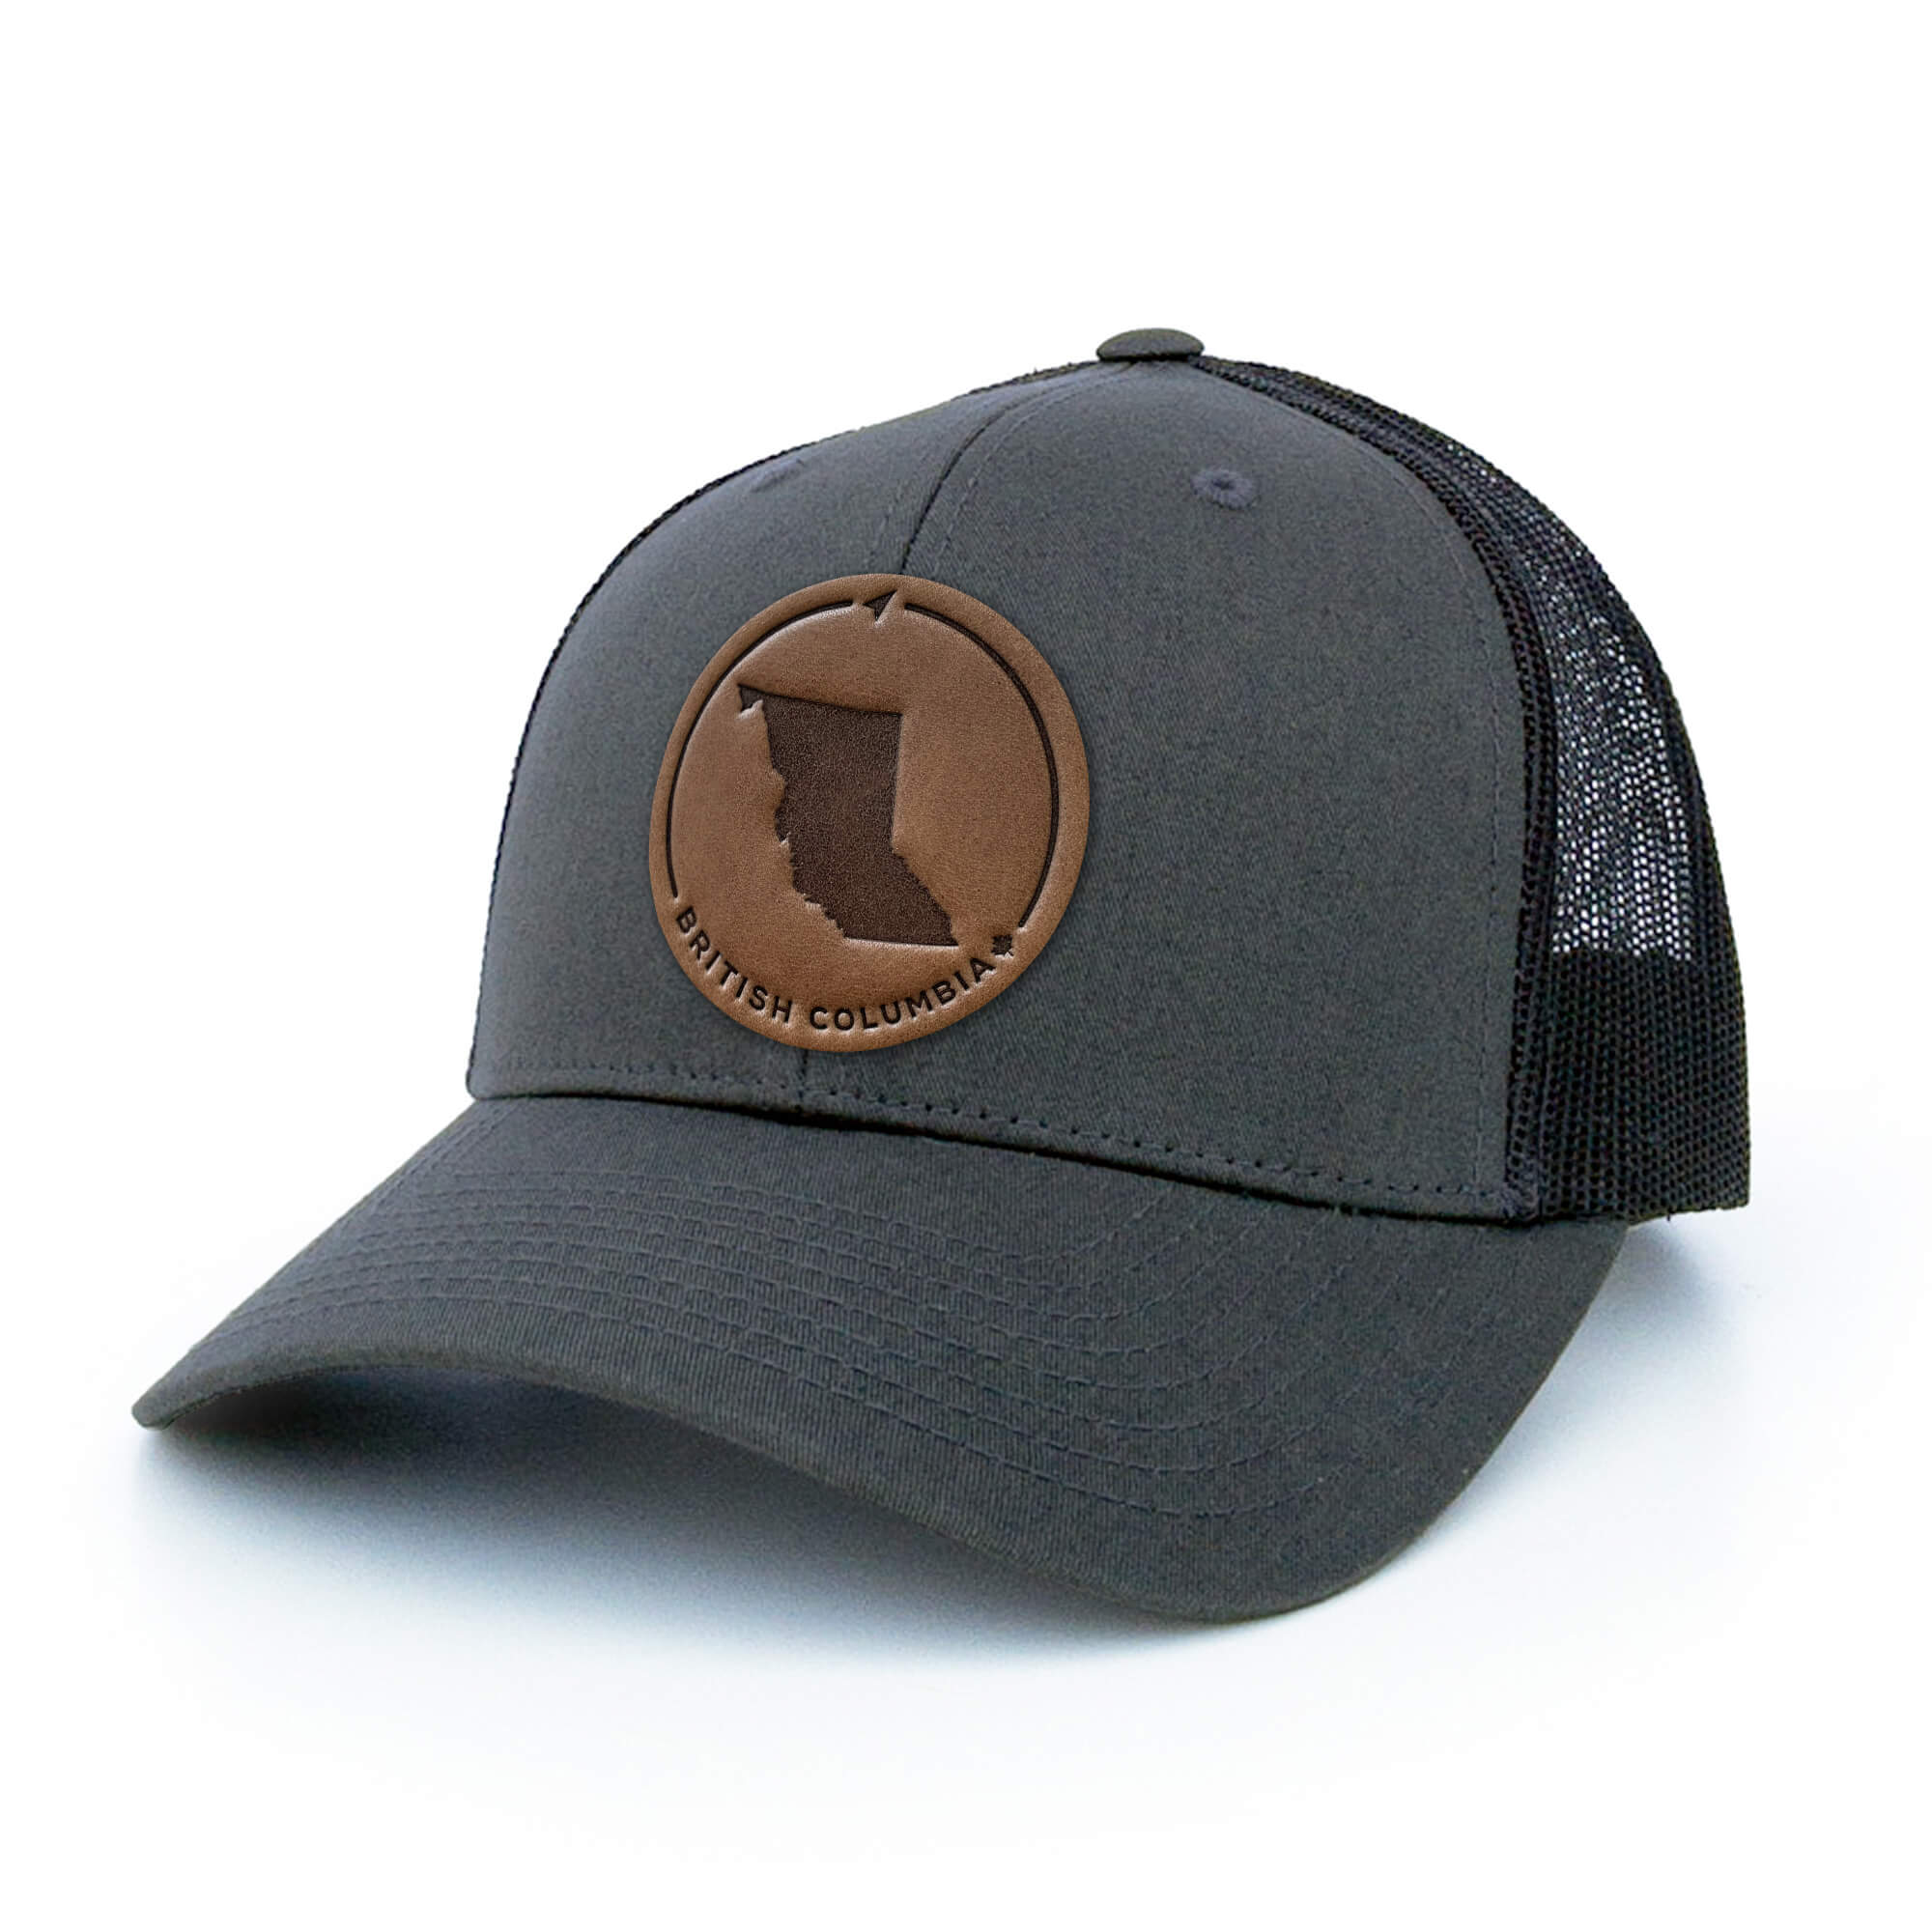 British Columbia Leather Patch Hat